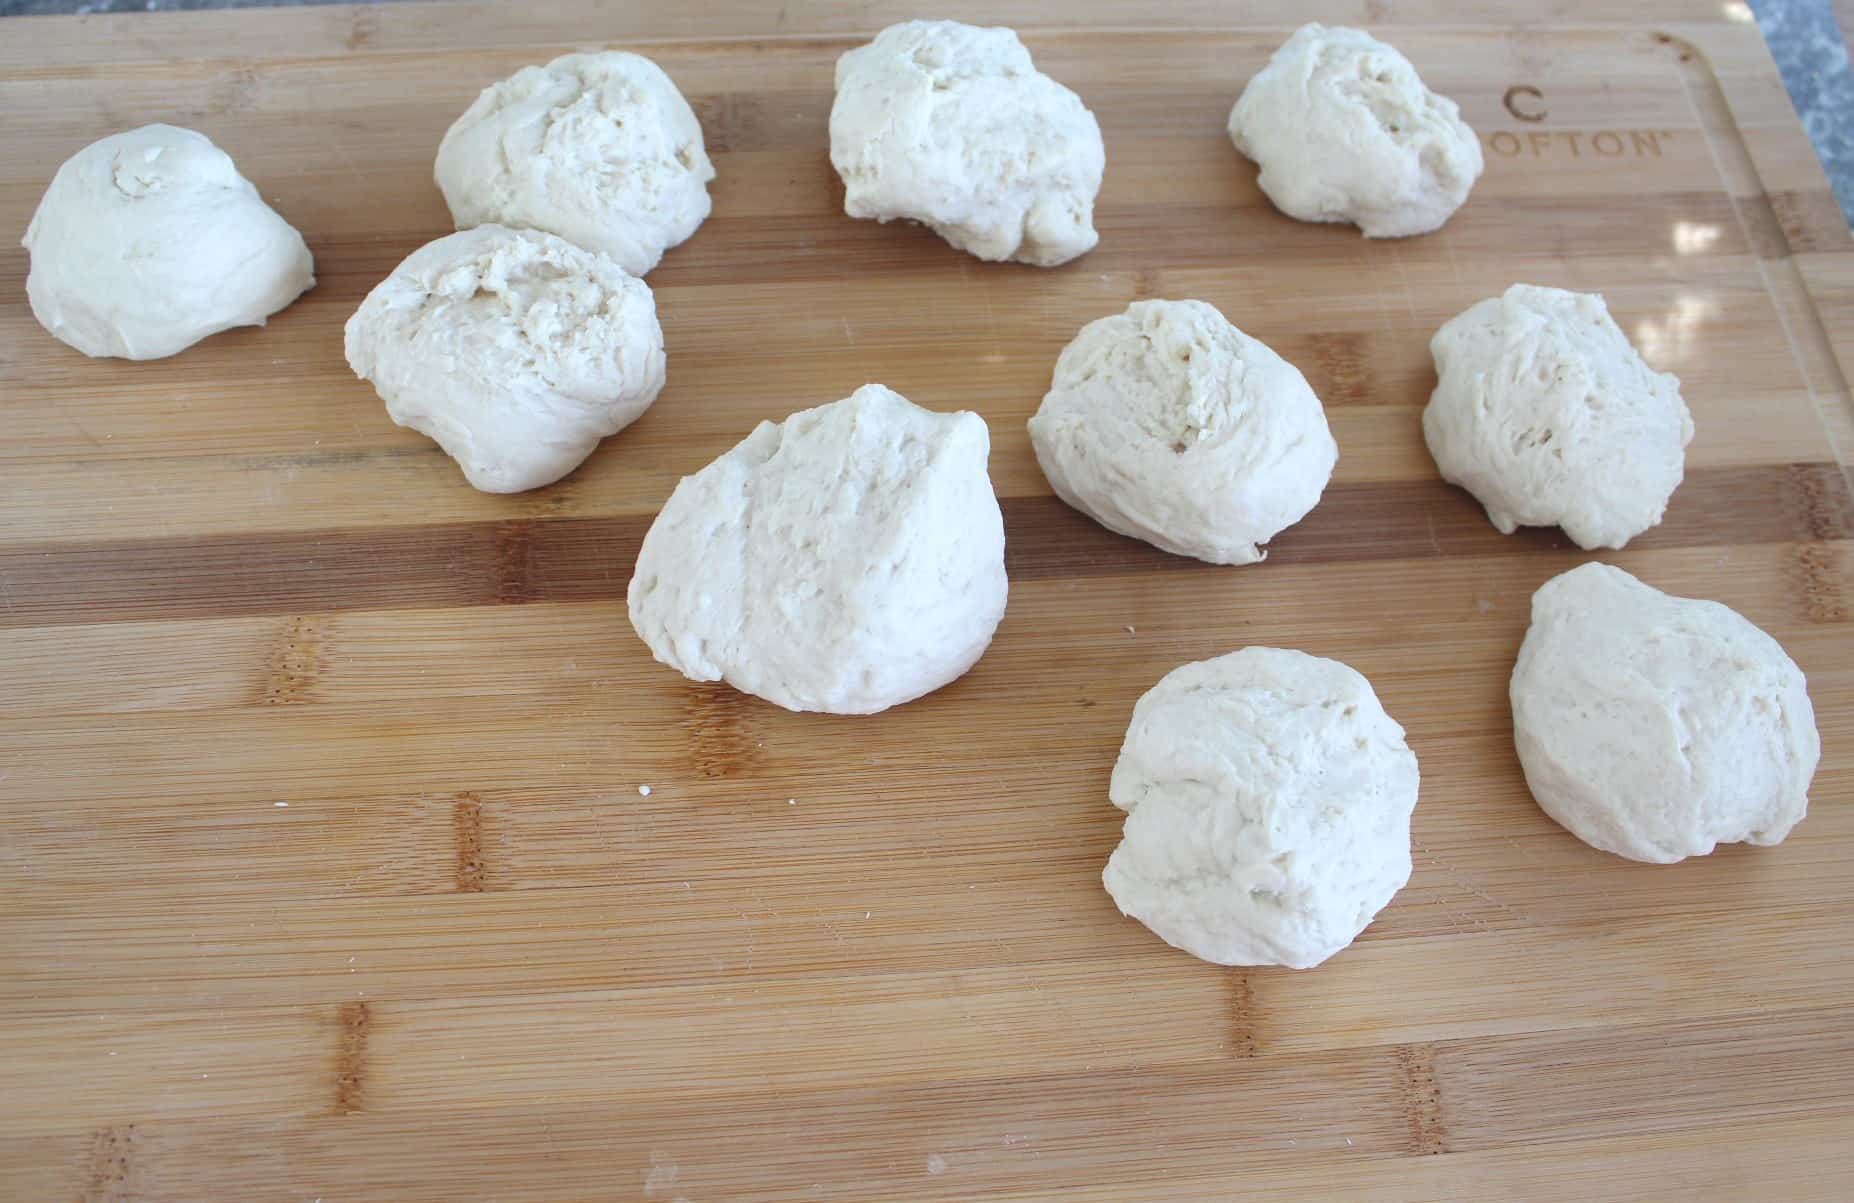 Dough is separated into rolls.